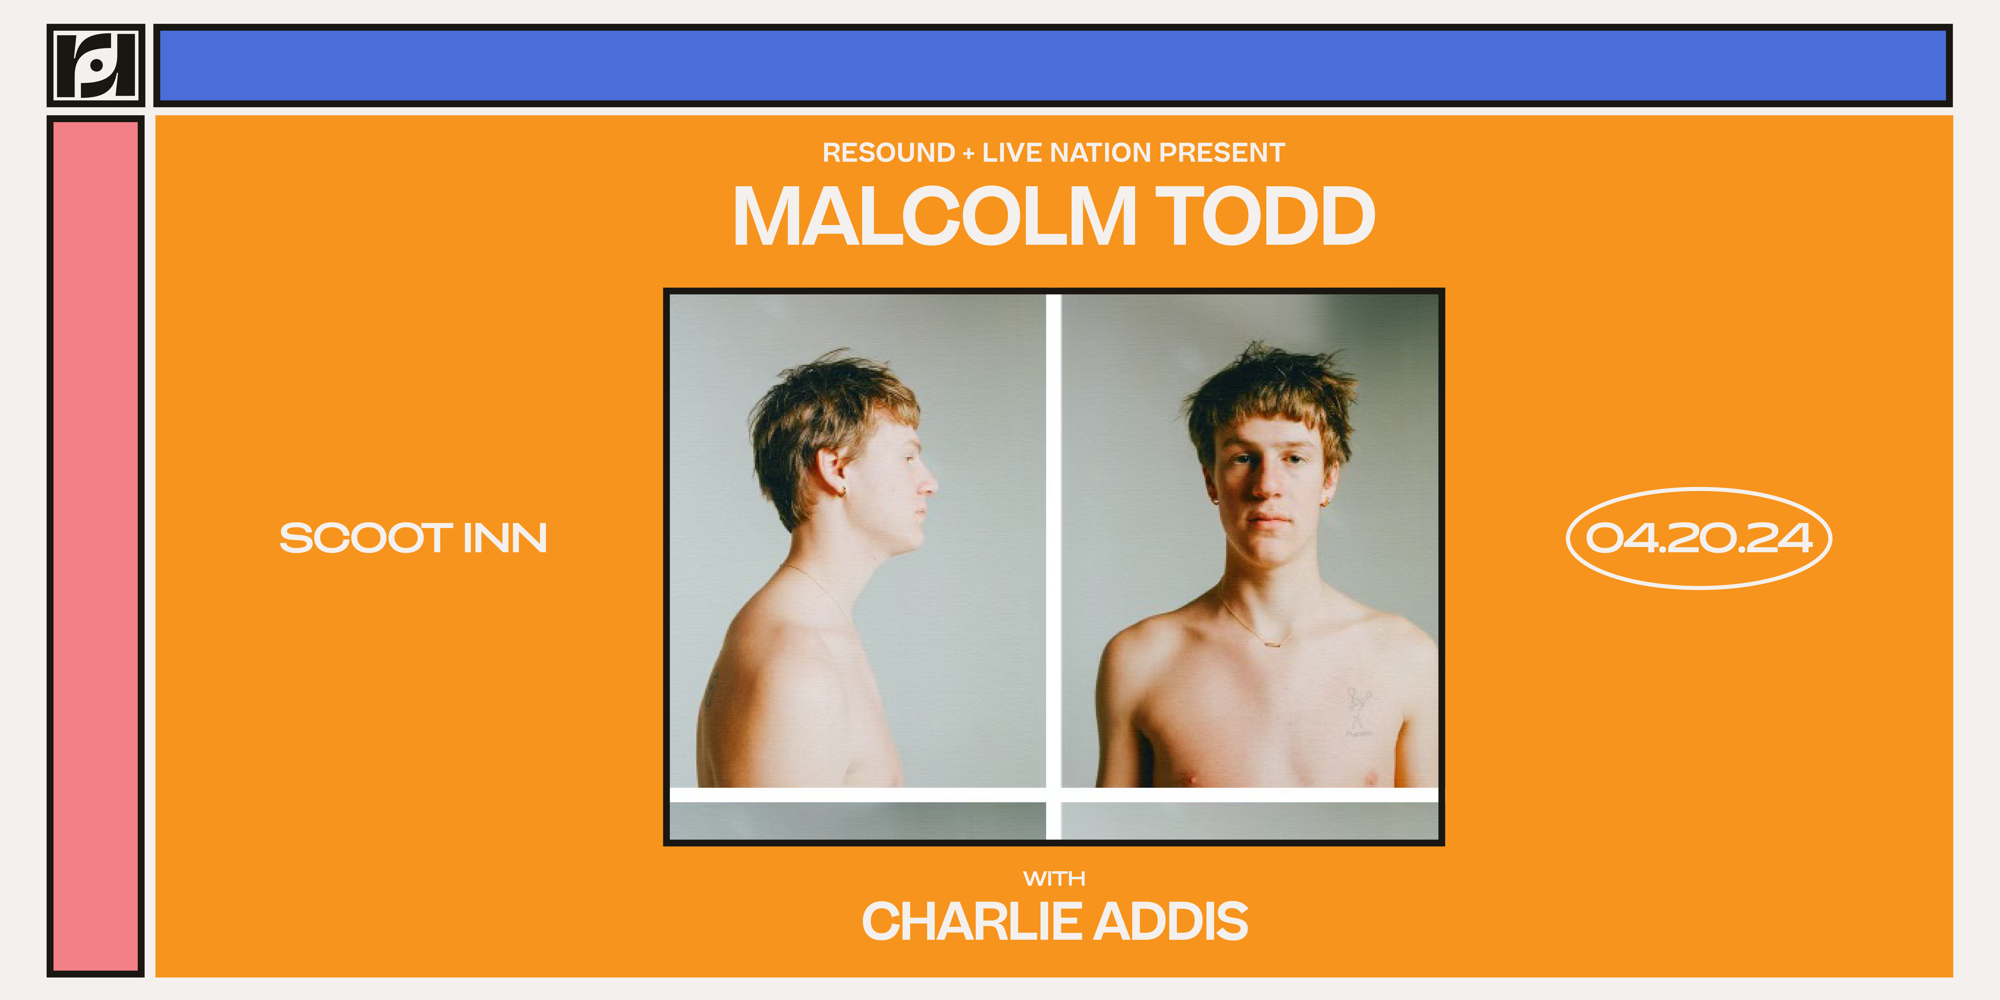 Live Nation & Resound Present: Malcolm Todd w/ Charlie Addis at Scoot Inn promotional image